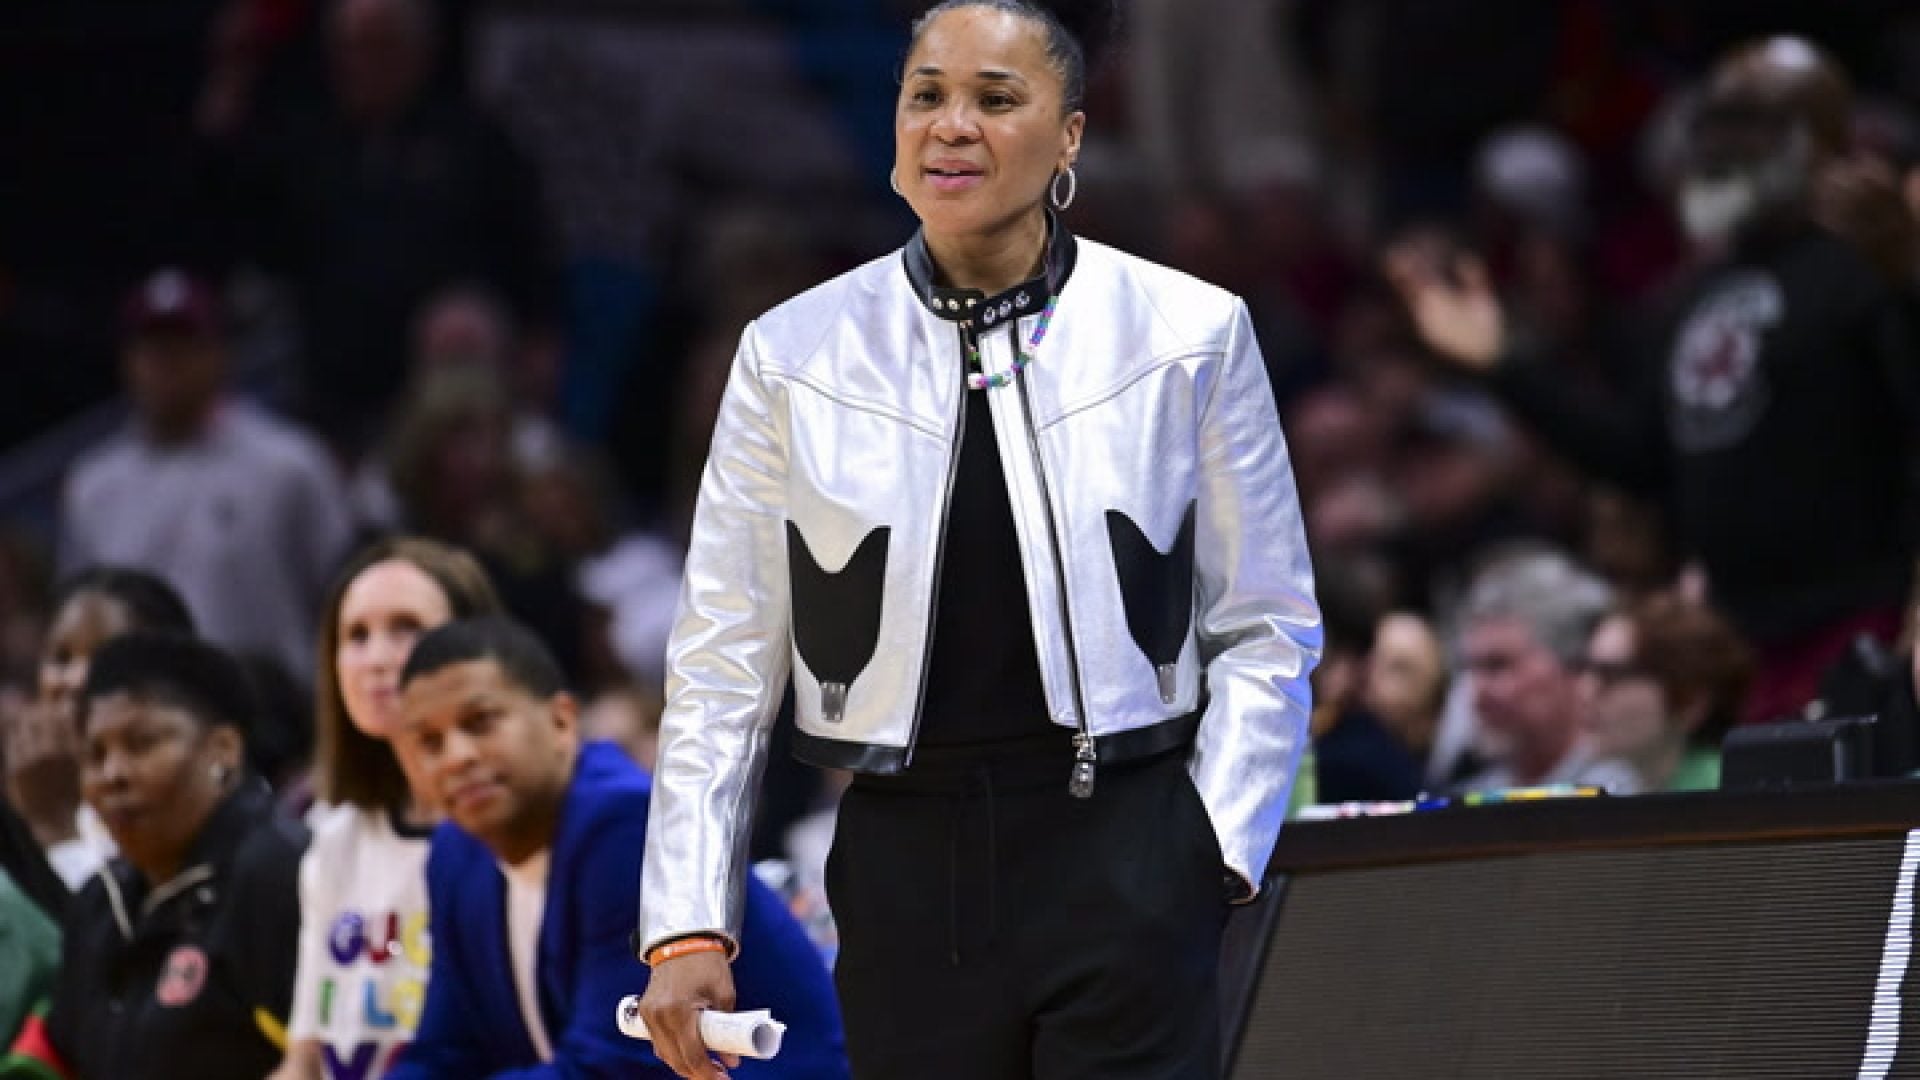 WATCH: In My Feed – A Closer Look At The Designer Looks Of Dawn Staley